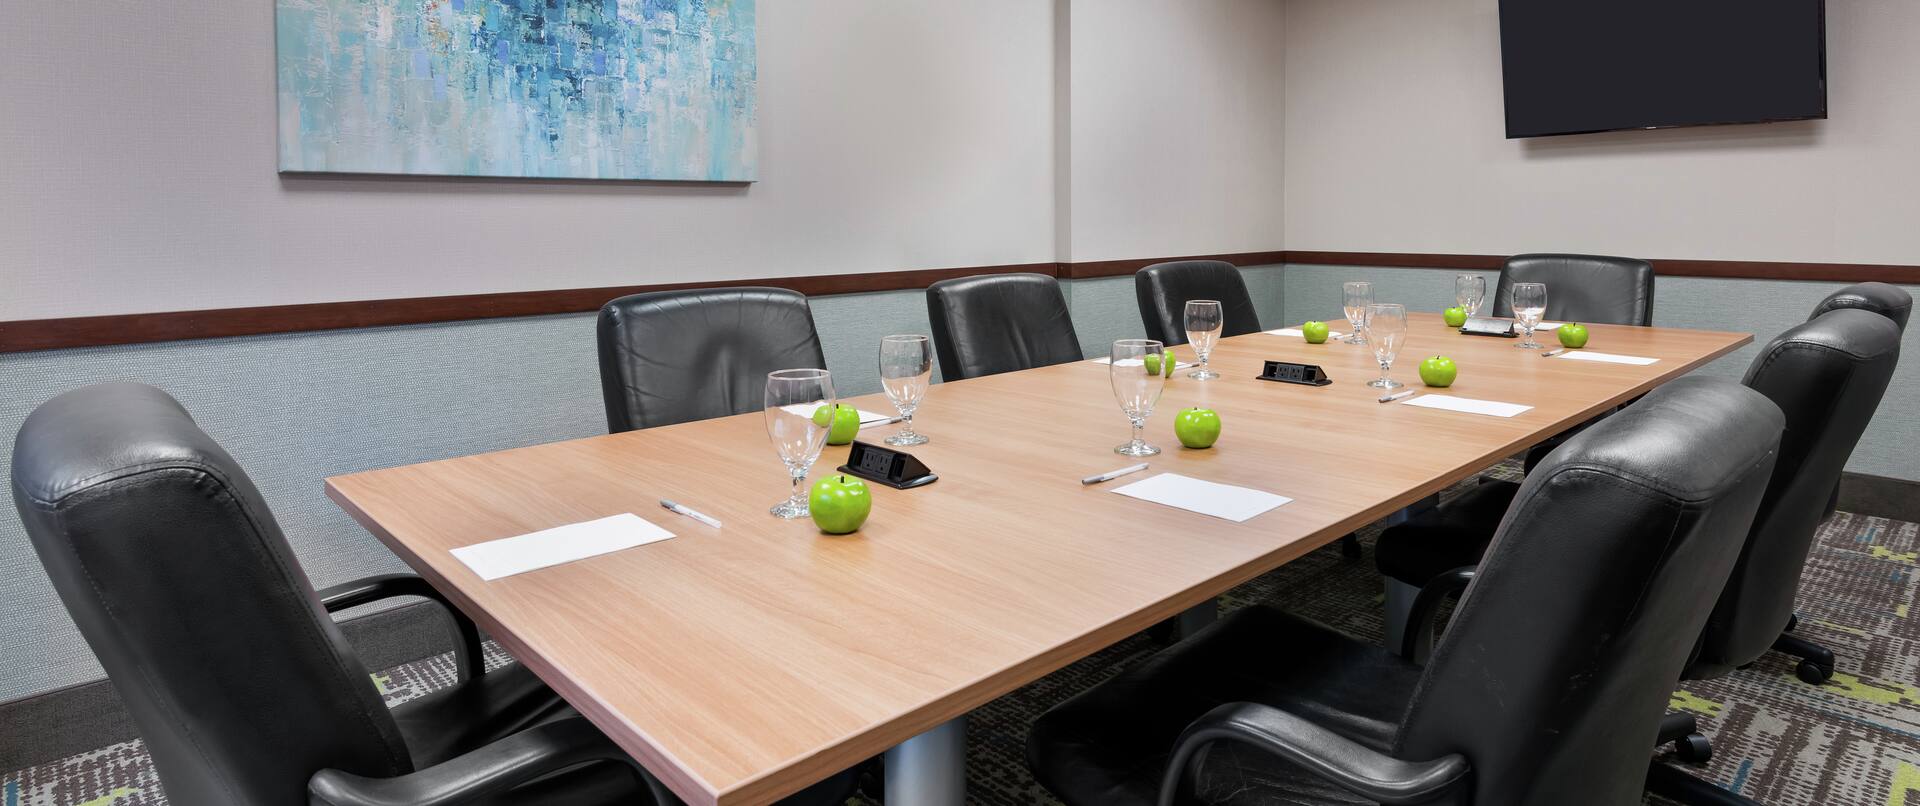 Boardroom with Meeting Table, Leather Office Chairs and Wall Mounted TV